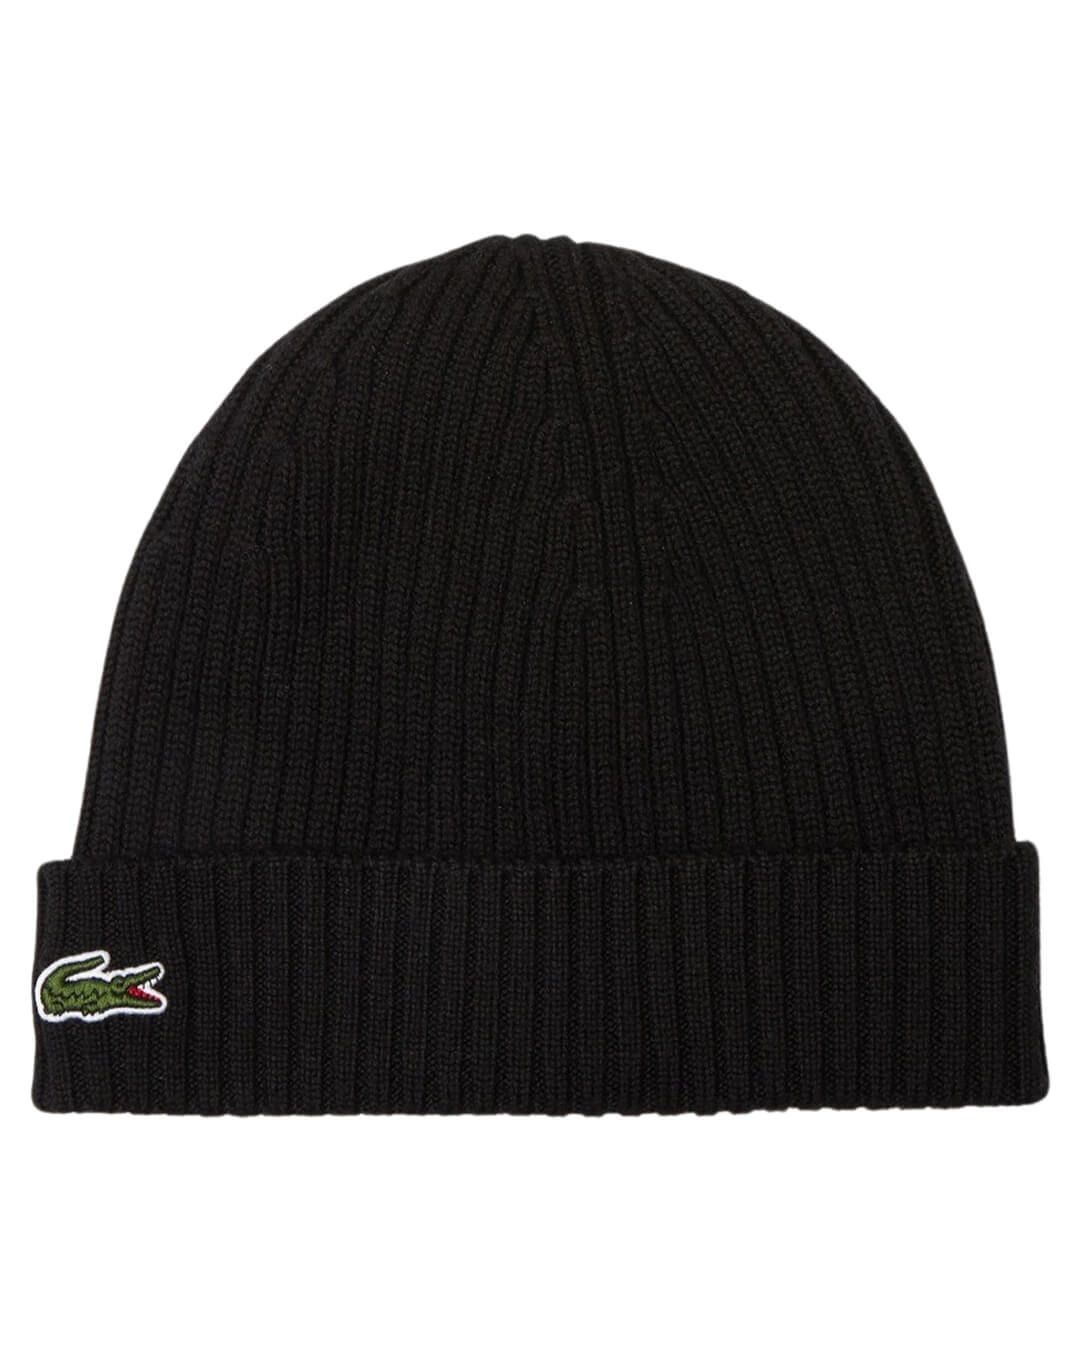 Lacoste Beanies ONE SIZE Lacoste Unisex Ribbed Wool Black Beanie